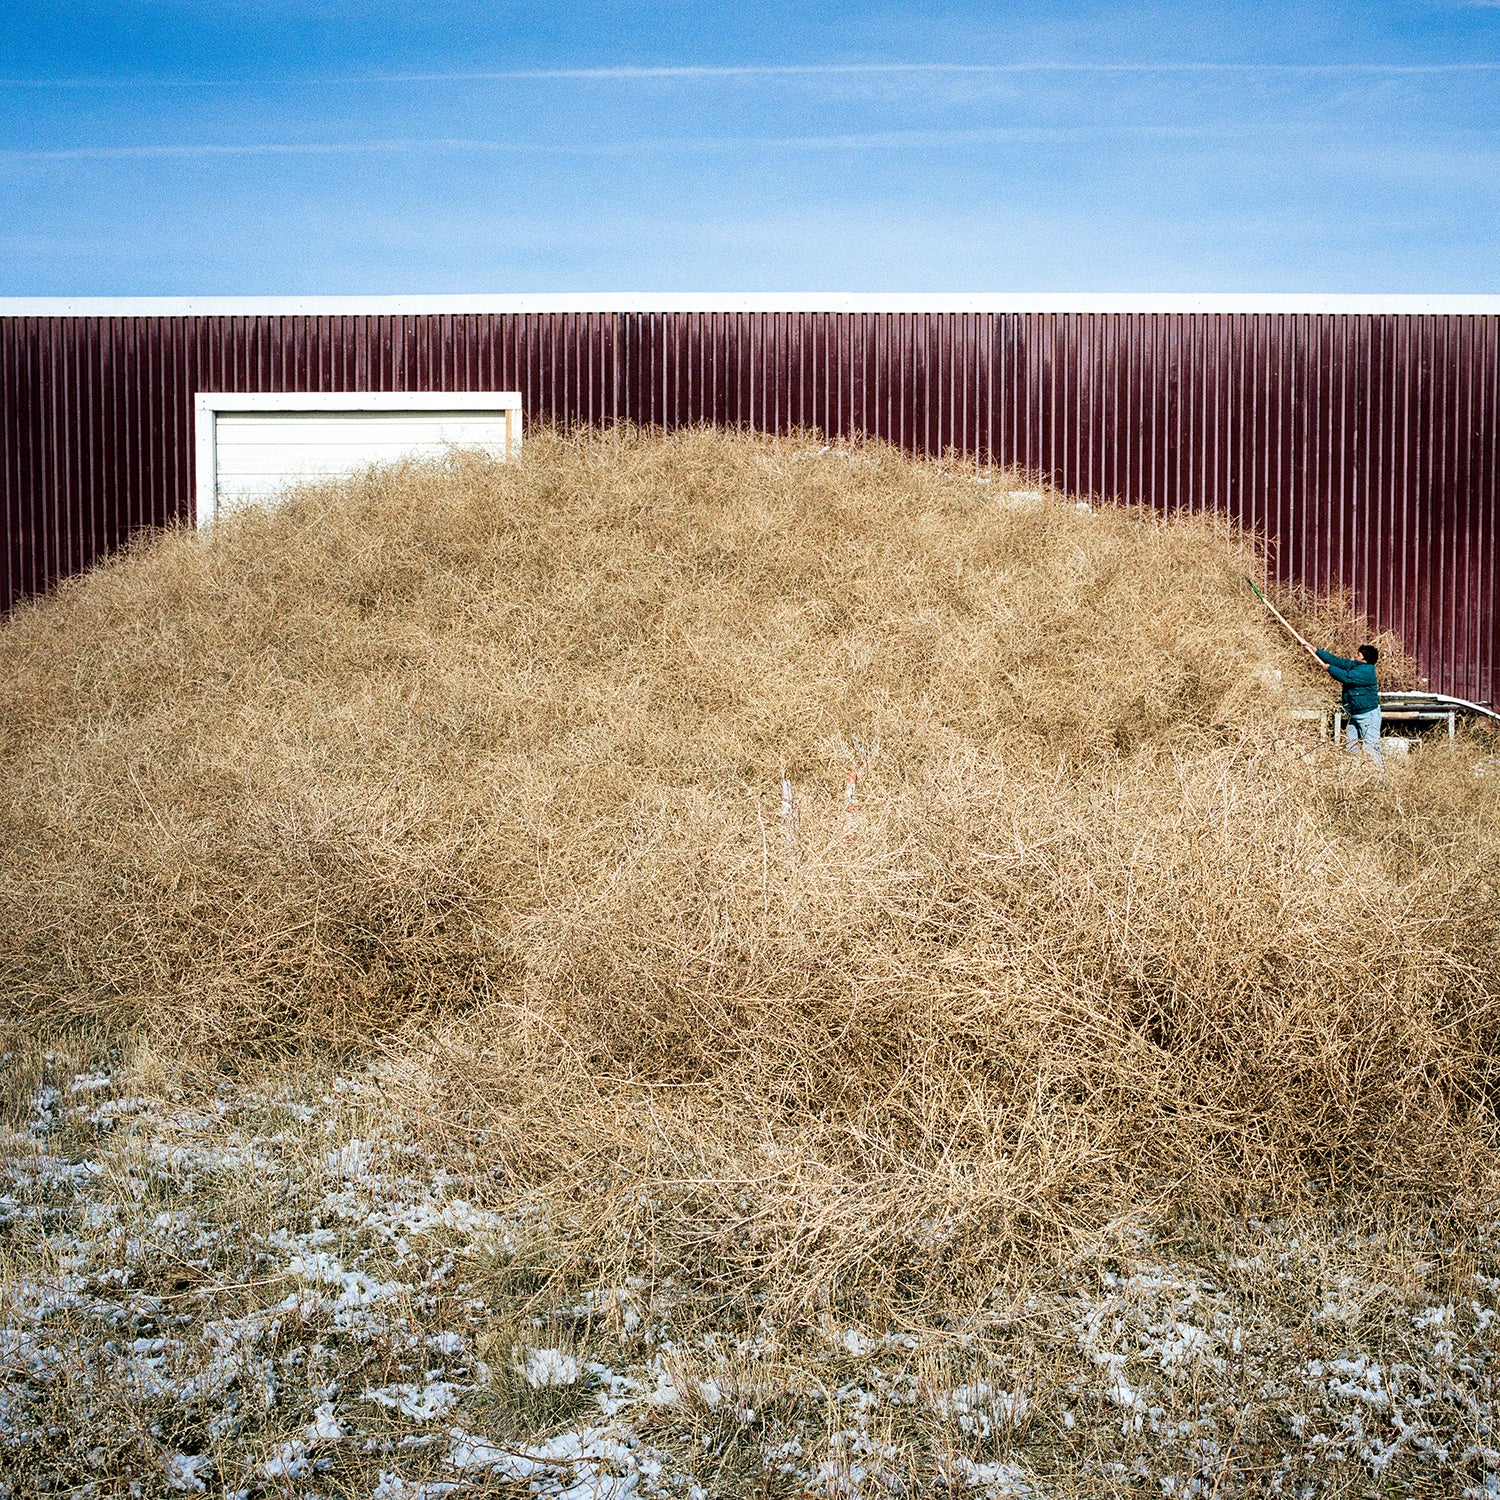 Tumbling tumbleweeds: Western icon also can be an unwelcome guest, Local